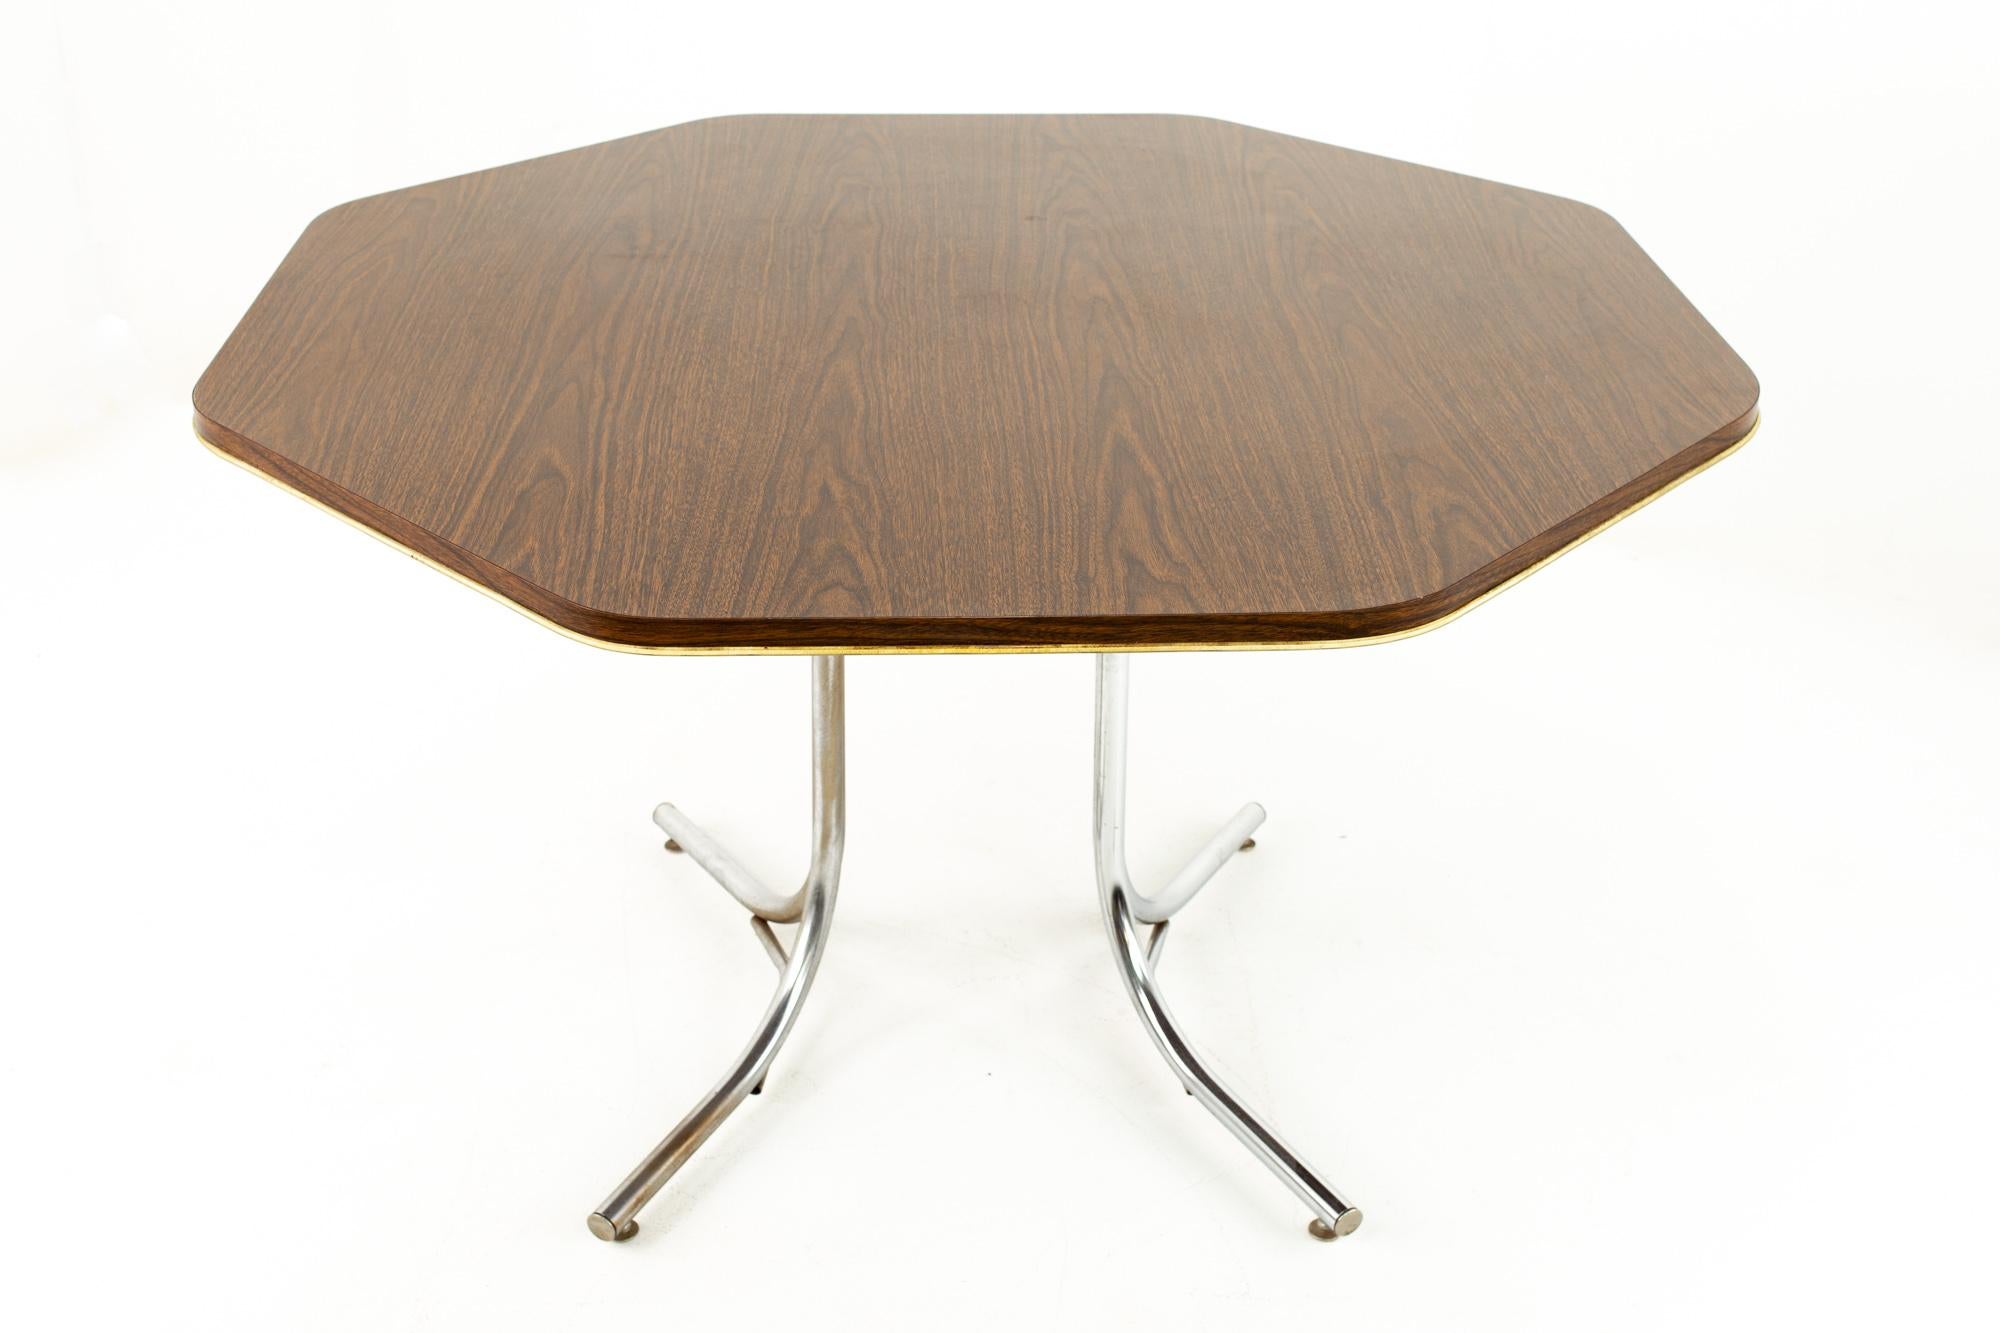 Chromecraft Mid Century octagonal Formica top table

Table measures: 47 wide x 29.5 deep x 47 high

This price includes getting this piece in what we call restored vintage condition. That means the piece is permanently fixed upon purchase so it’s